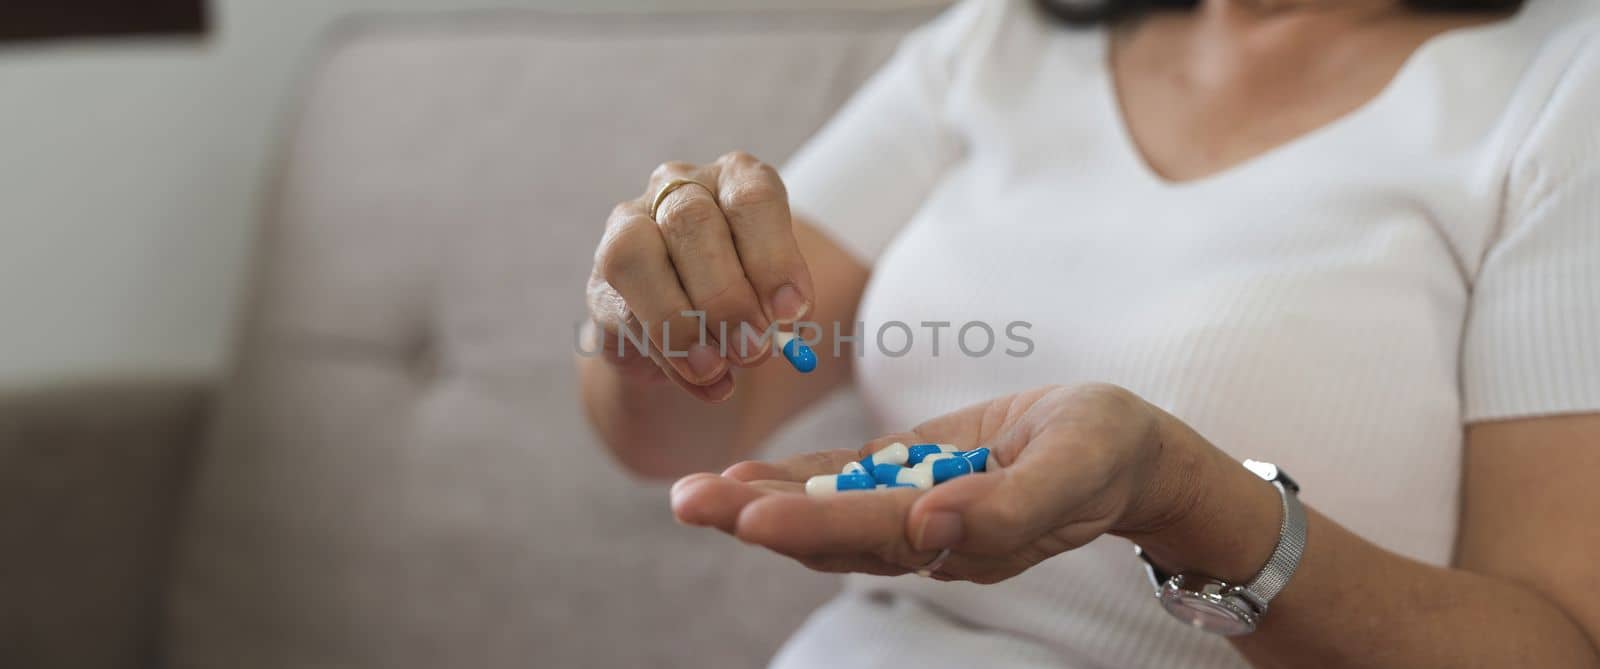 Elderly sick ill woman hold pills on hand pouring capsules from medication bottle take painkiller supplement medicine, old senior people pharmaceutical healthcare treatment concept, close up view.